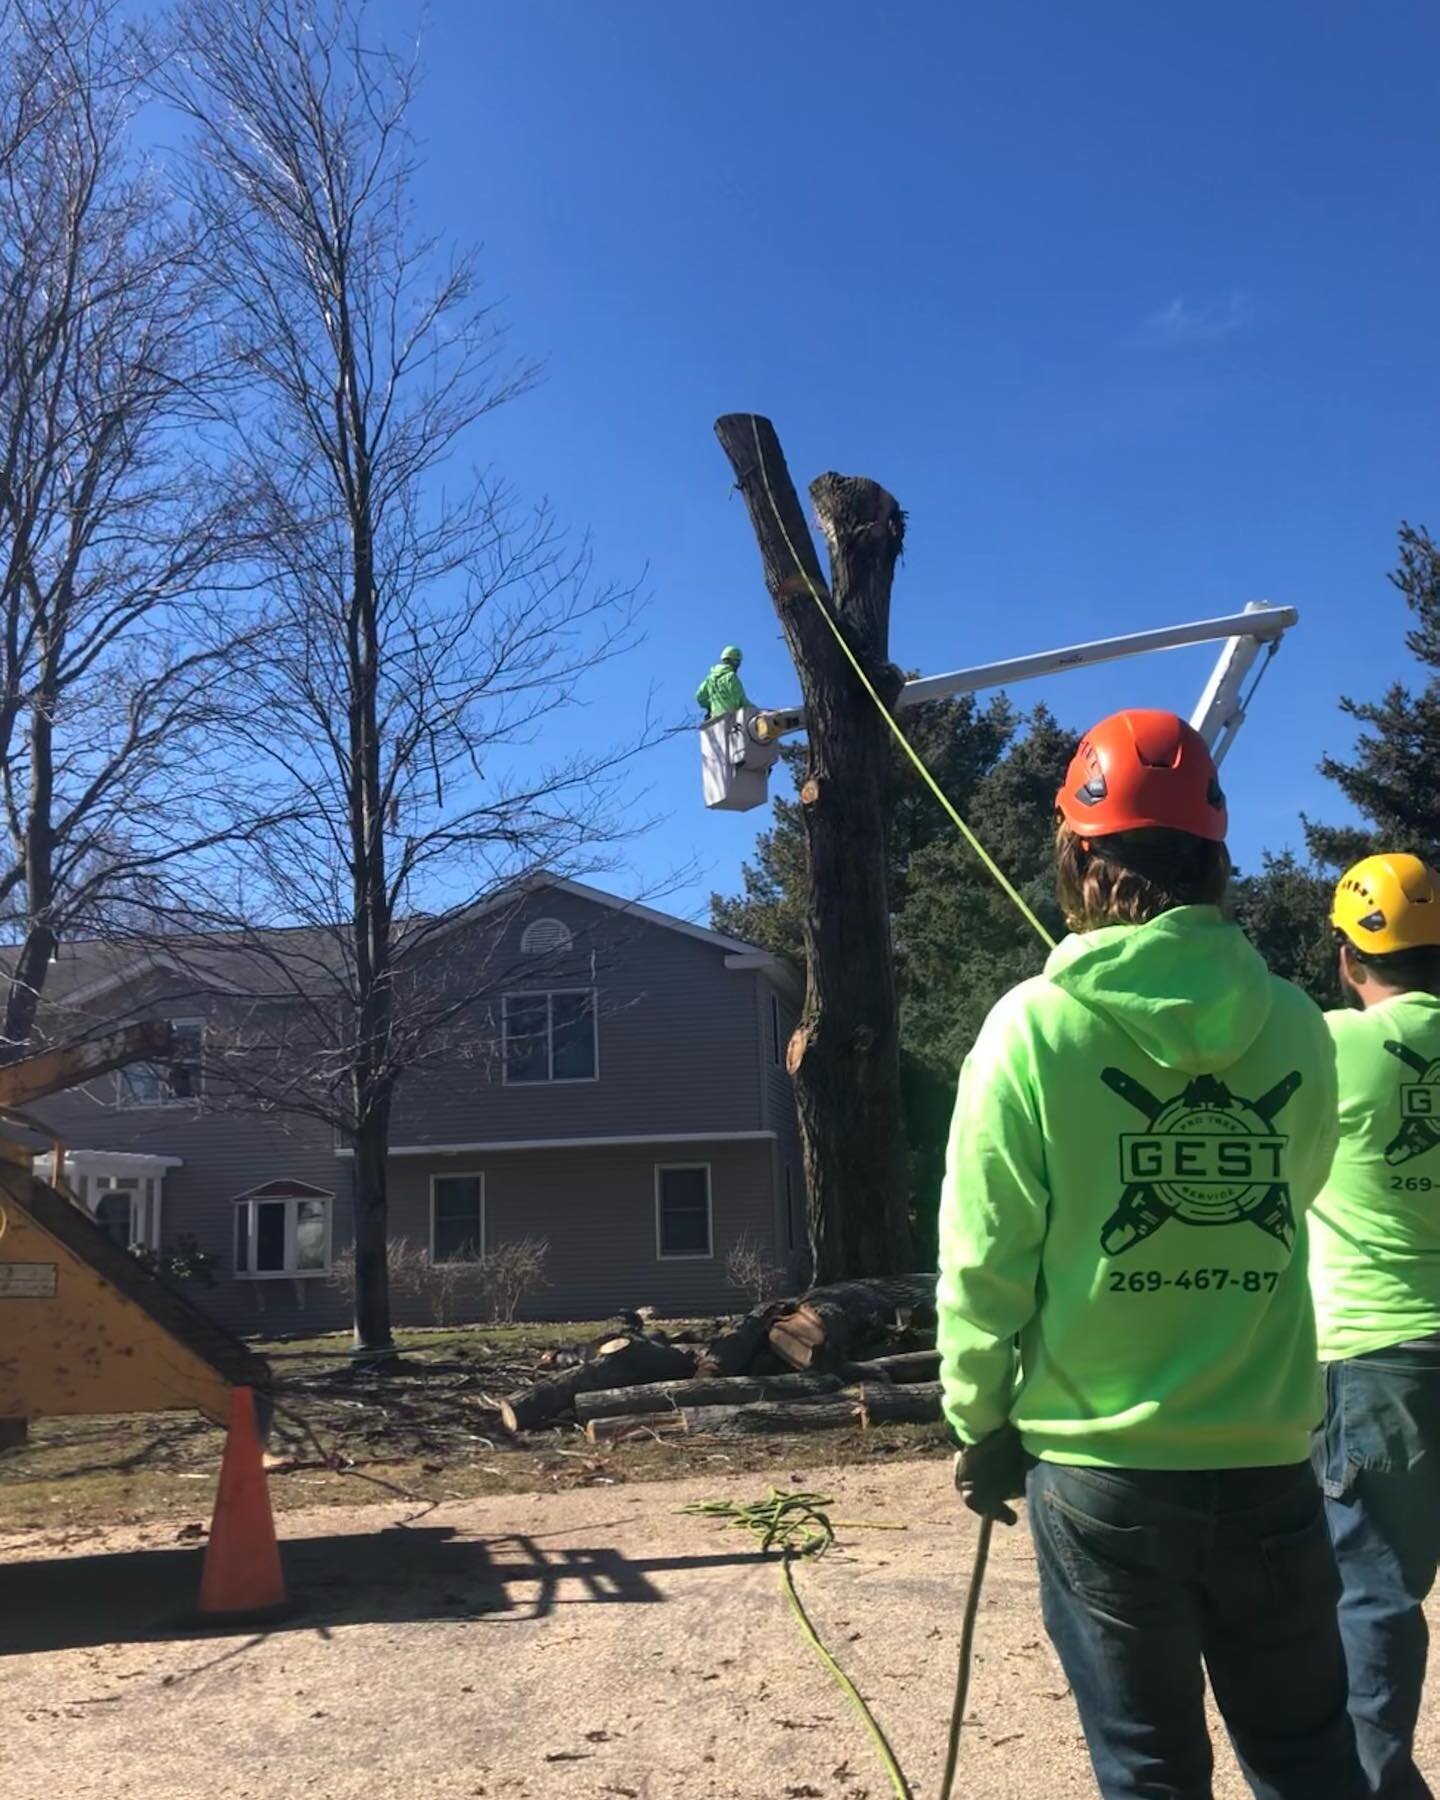 We can&rsquo;t tell if it&rsquo;s winter or spring on a day like today. Either way, it&rsquo;s a great time to get tree work done! 

📞 (269)467-8765